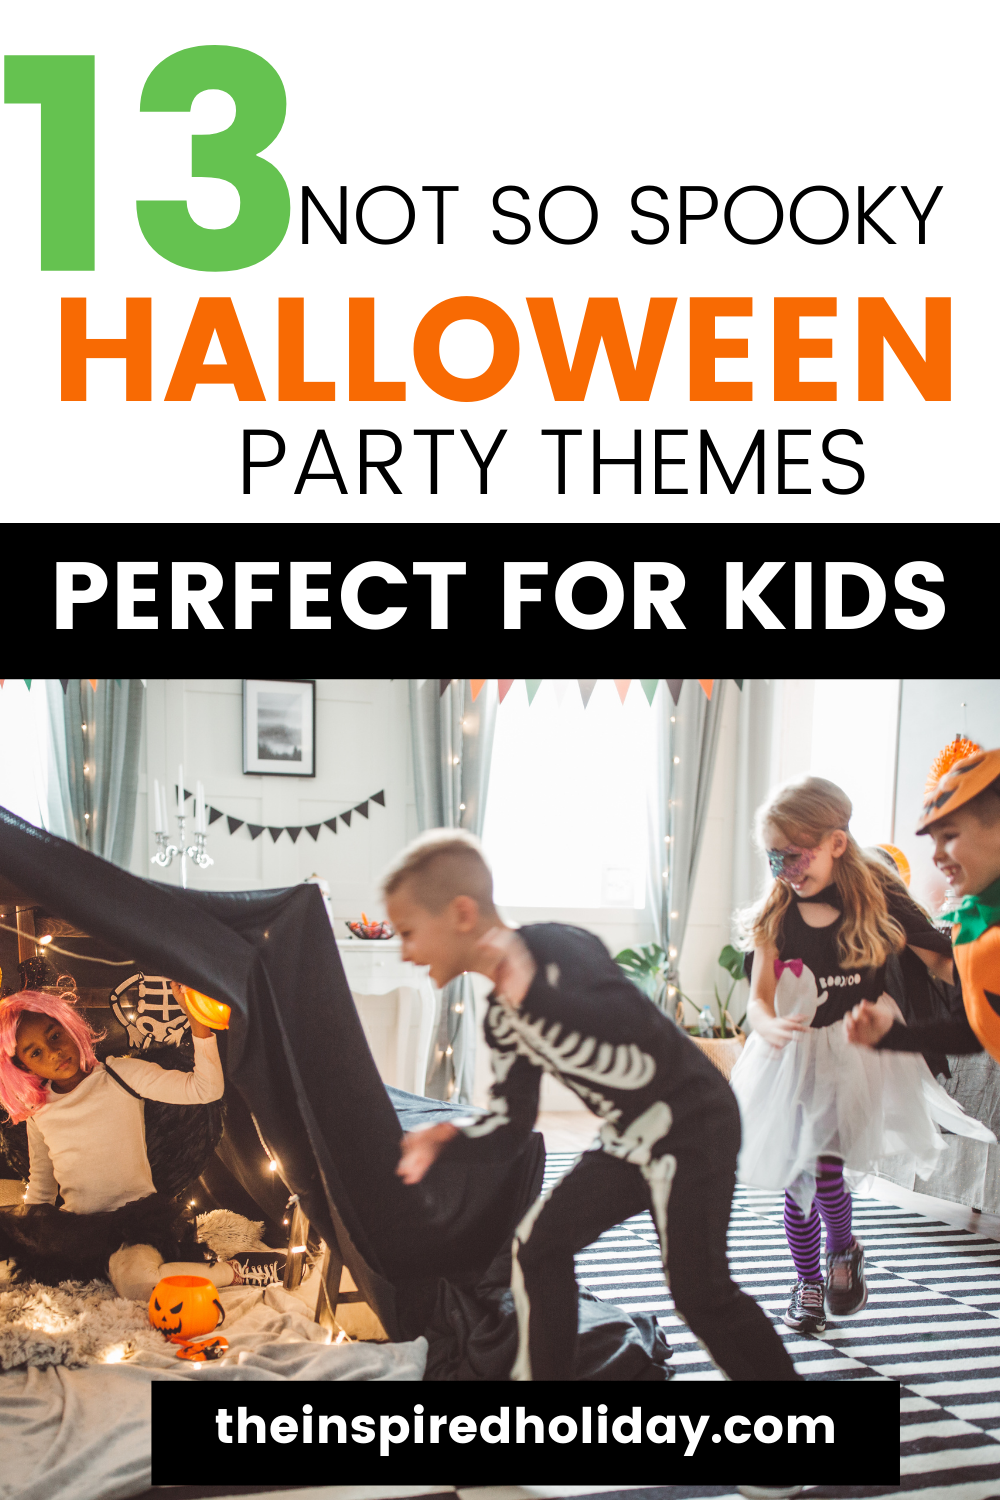 13 Halloween Party Ideas For Kids - The Inspired Holiday